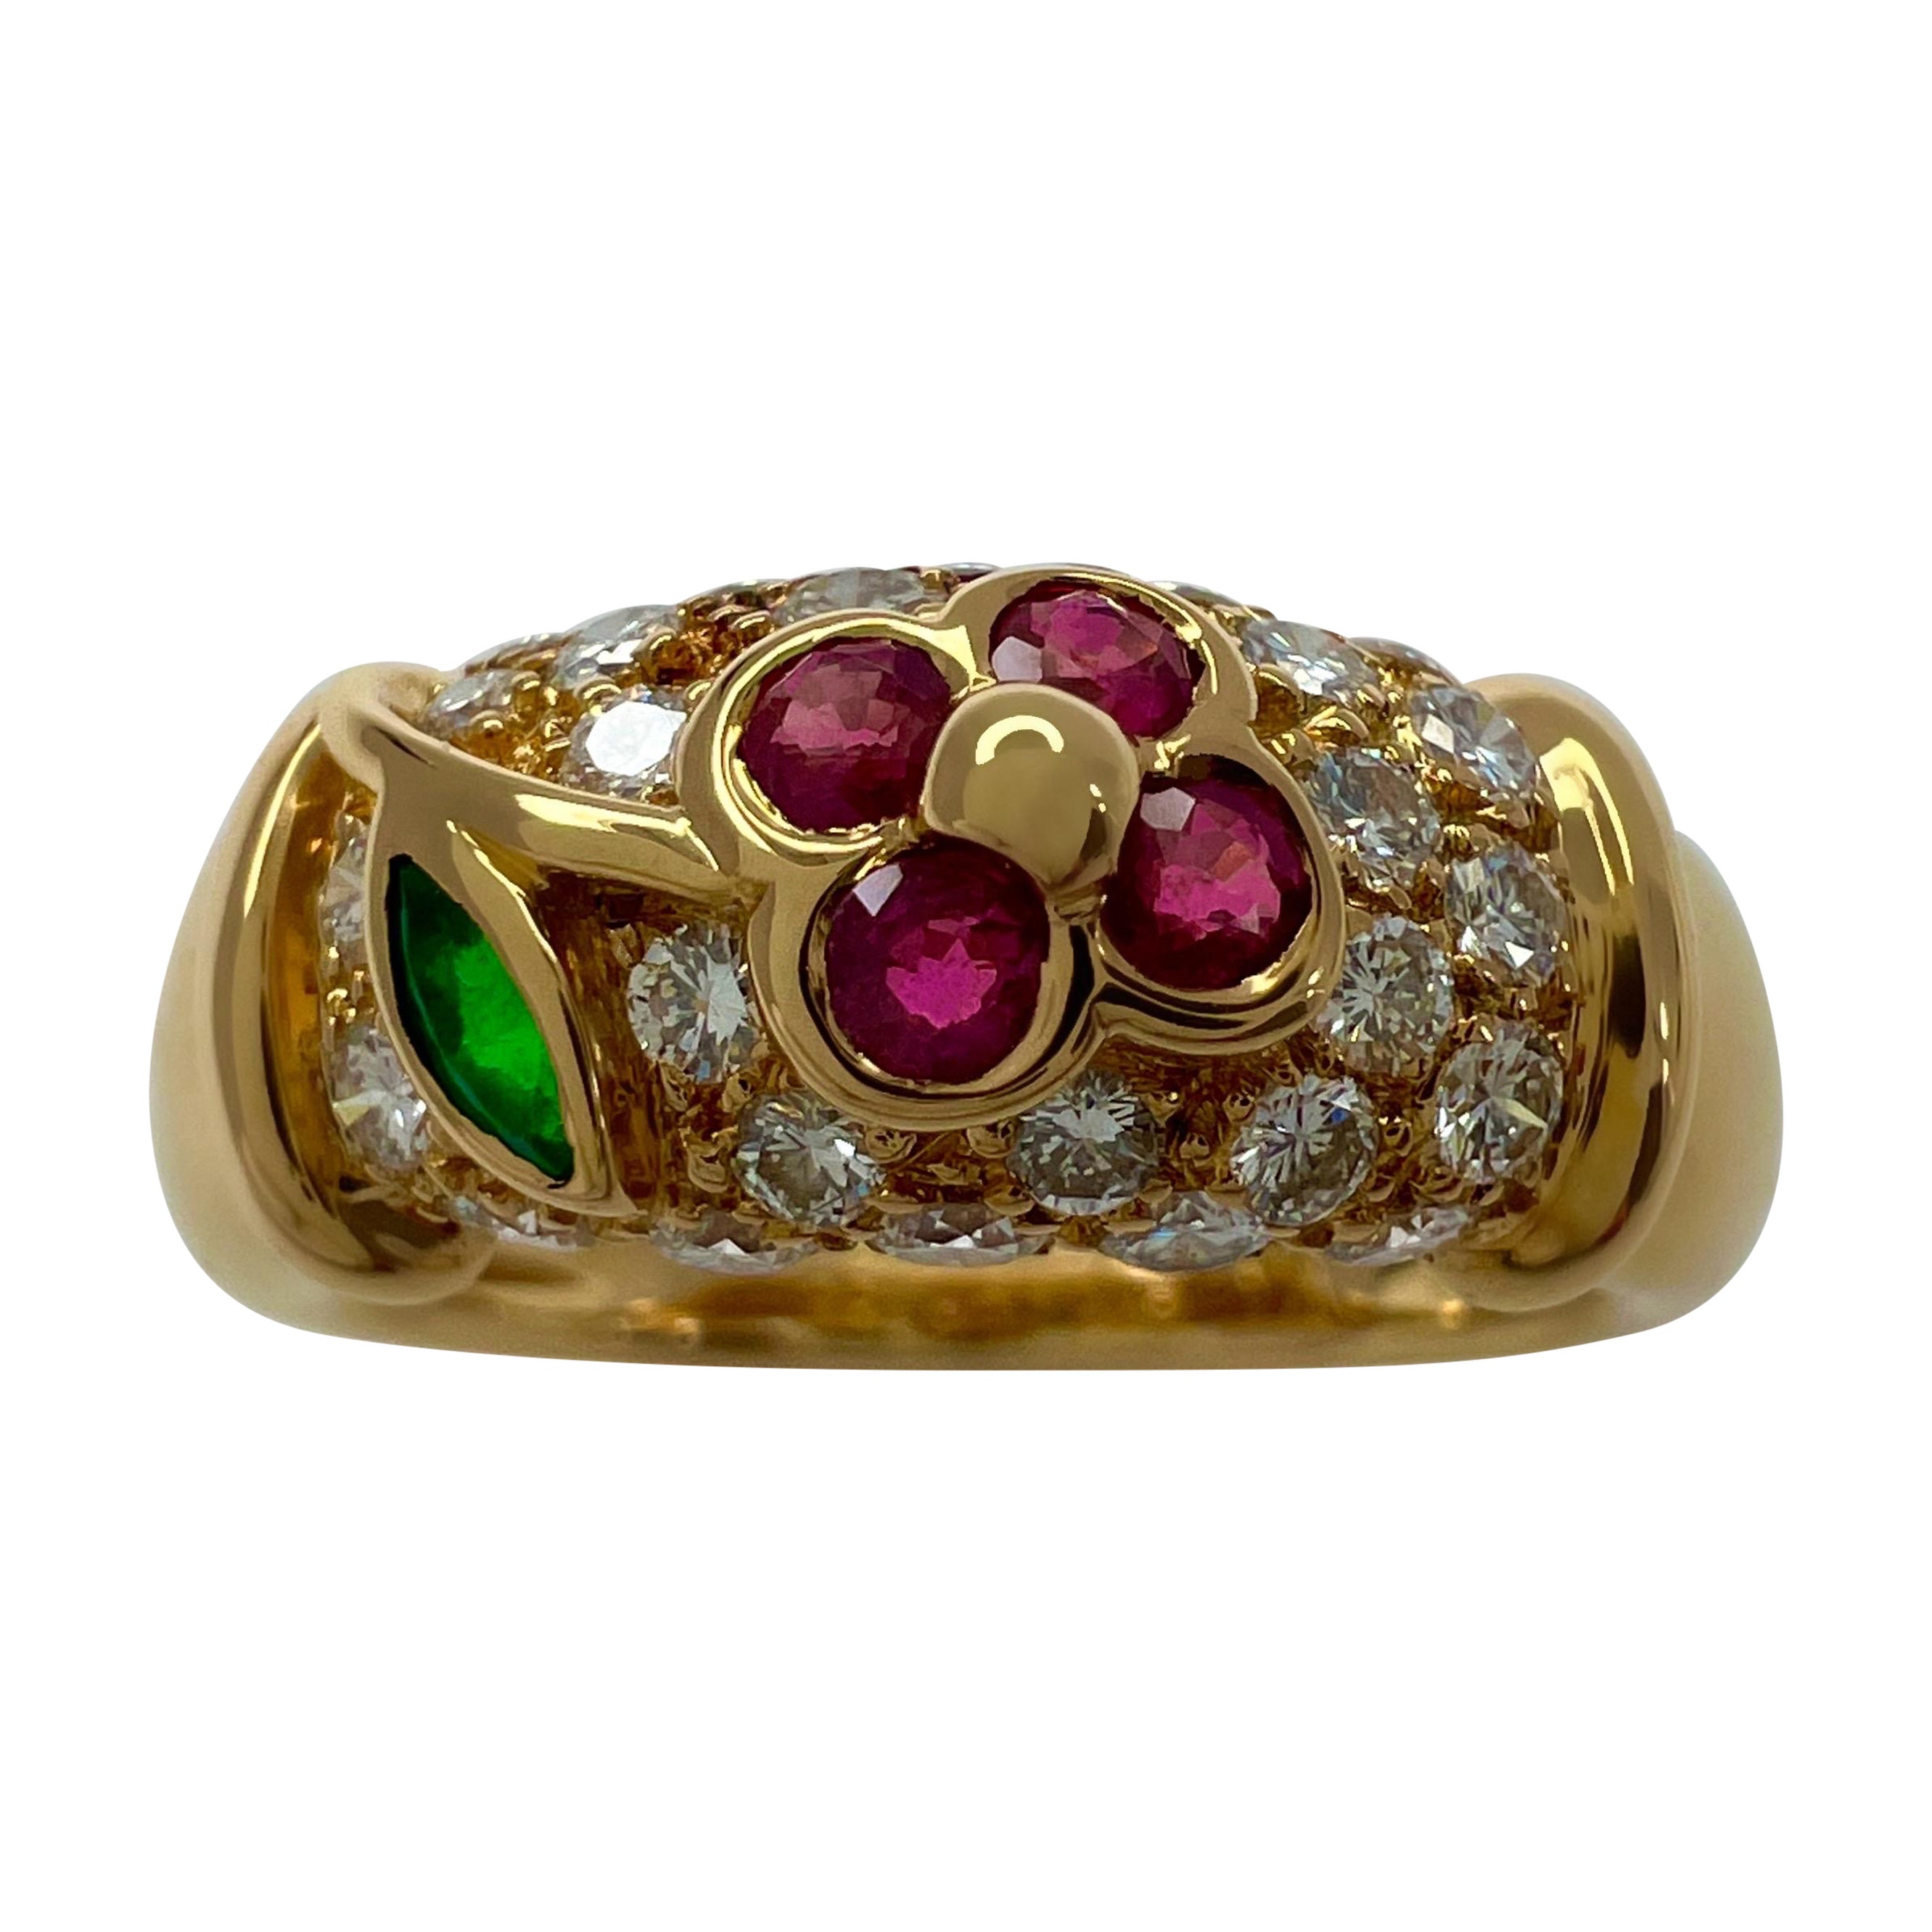 Rare Van Cleef & Arpels Ruby Emerald Diamond 18k Yellow Gold Floral Flower Ring For Sale